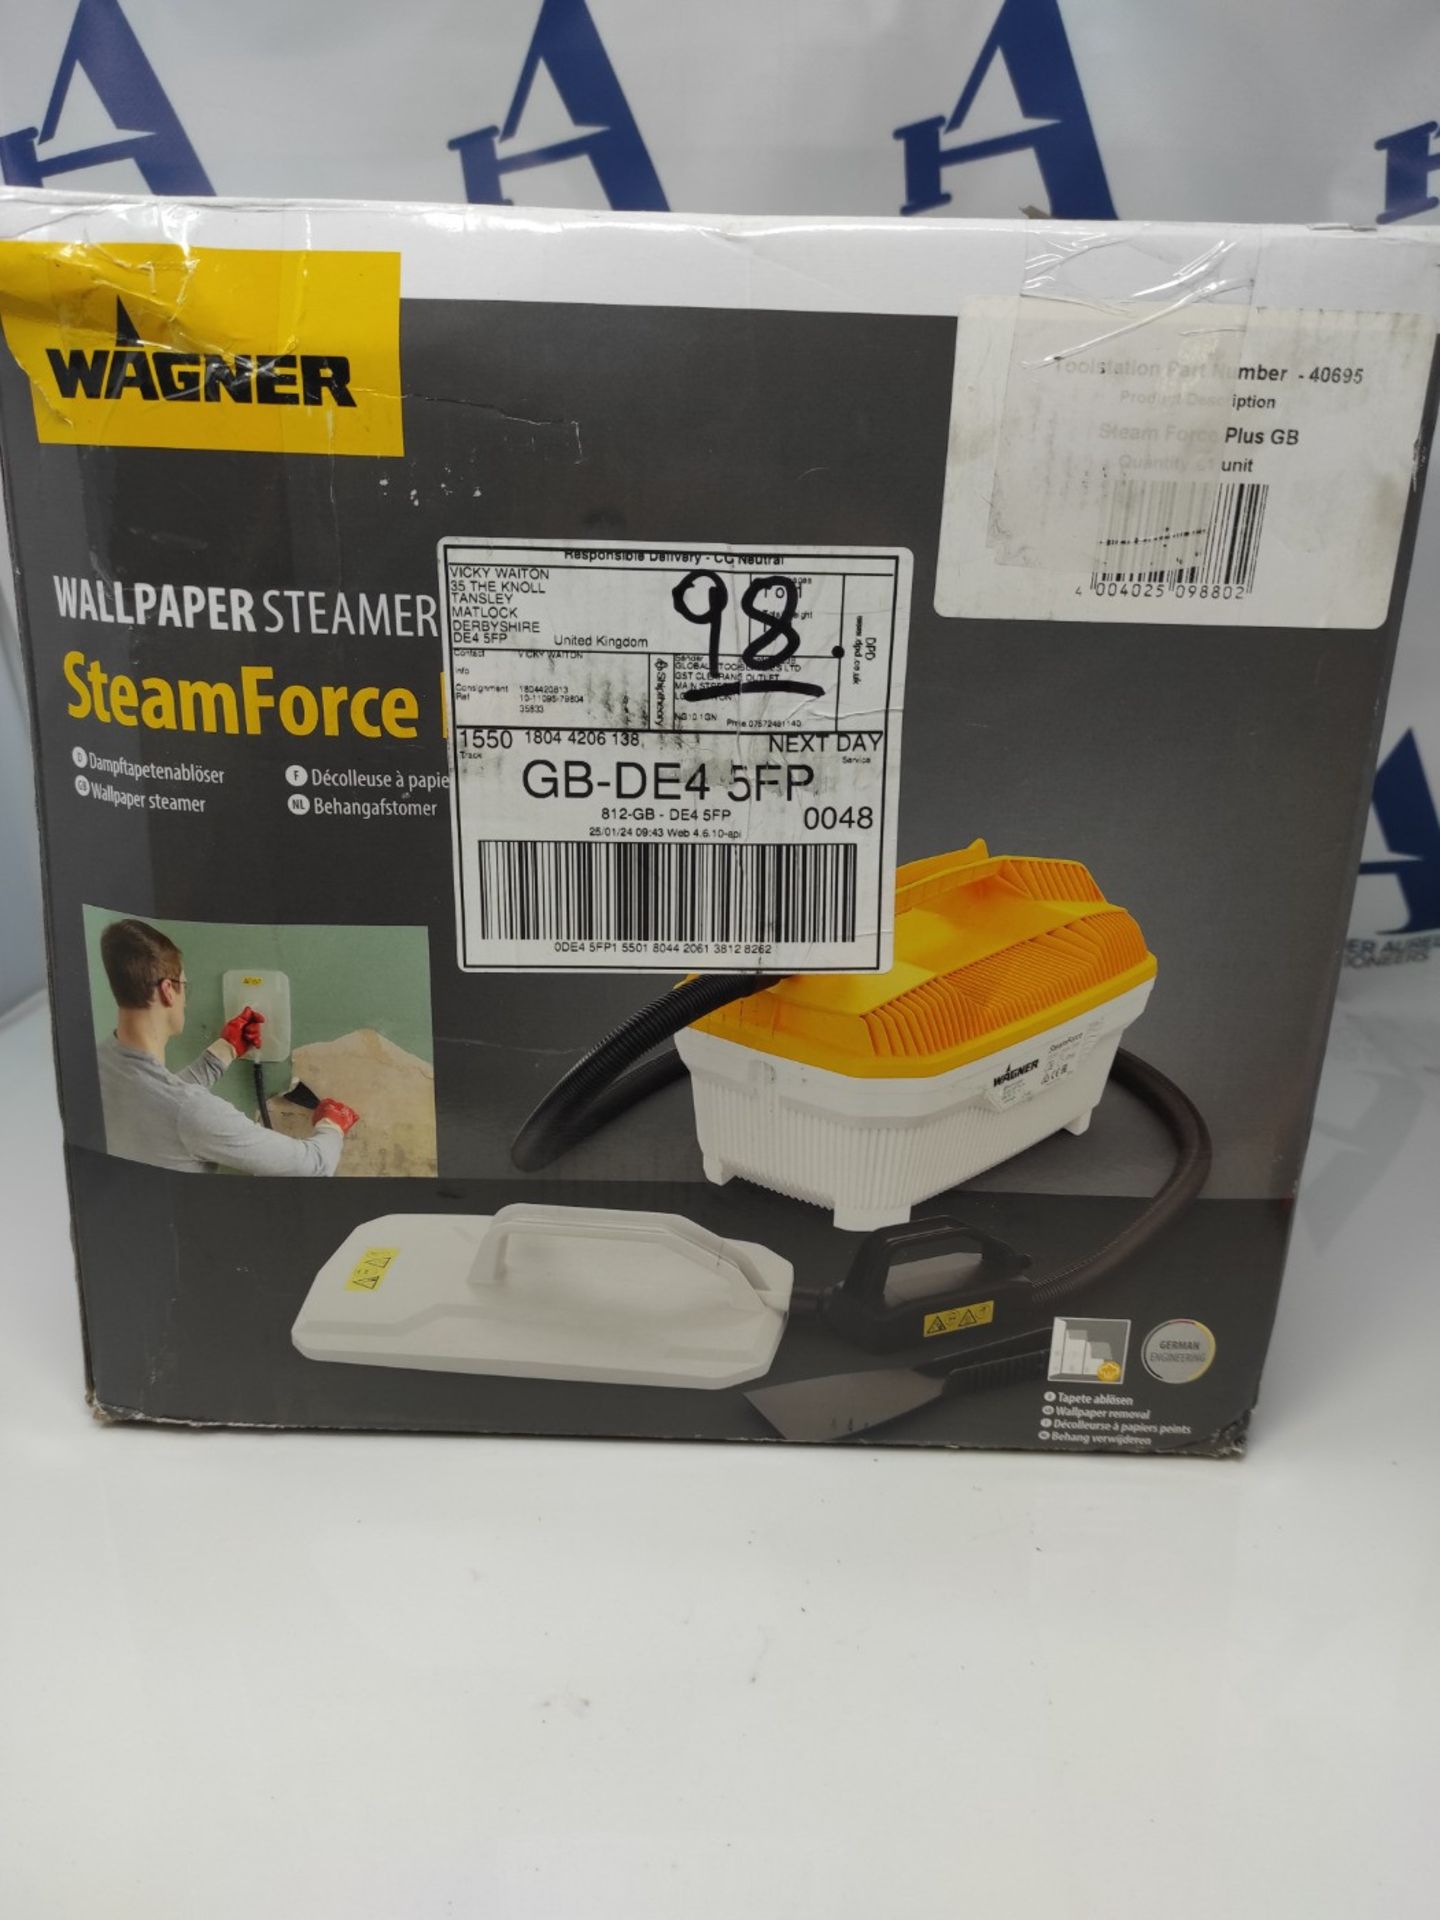 WAGNER Steam Wallpaper Stripper SteamForce, 4 l capacity, steaming time max. 70 min, 3 - Image 2 of 3